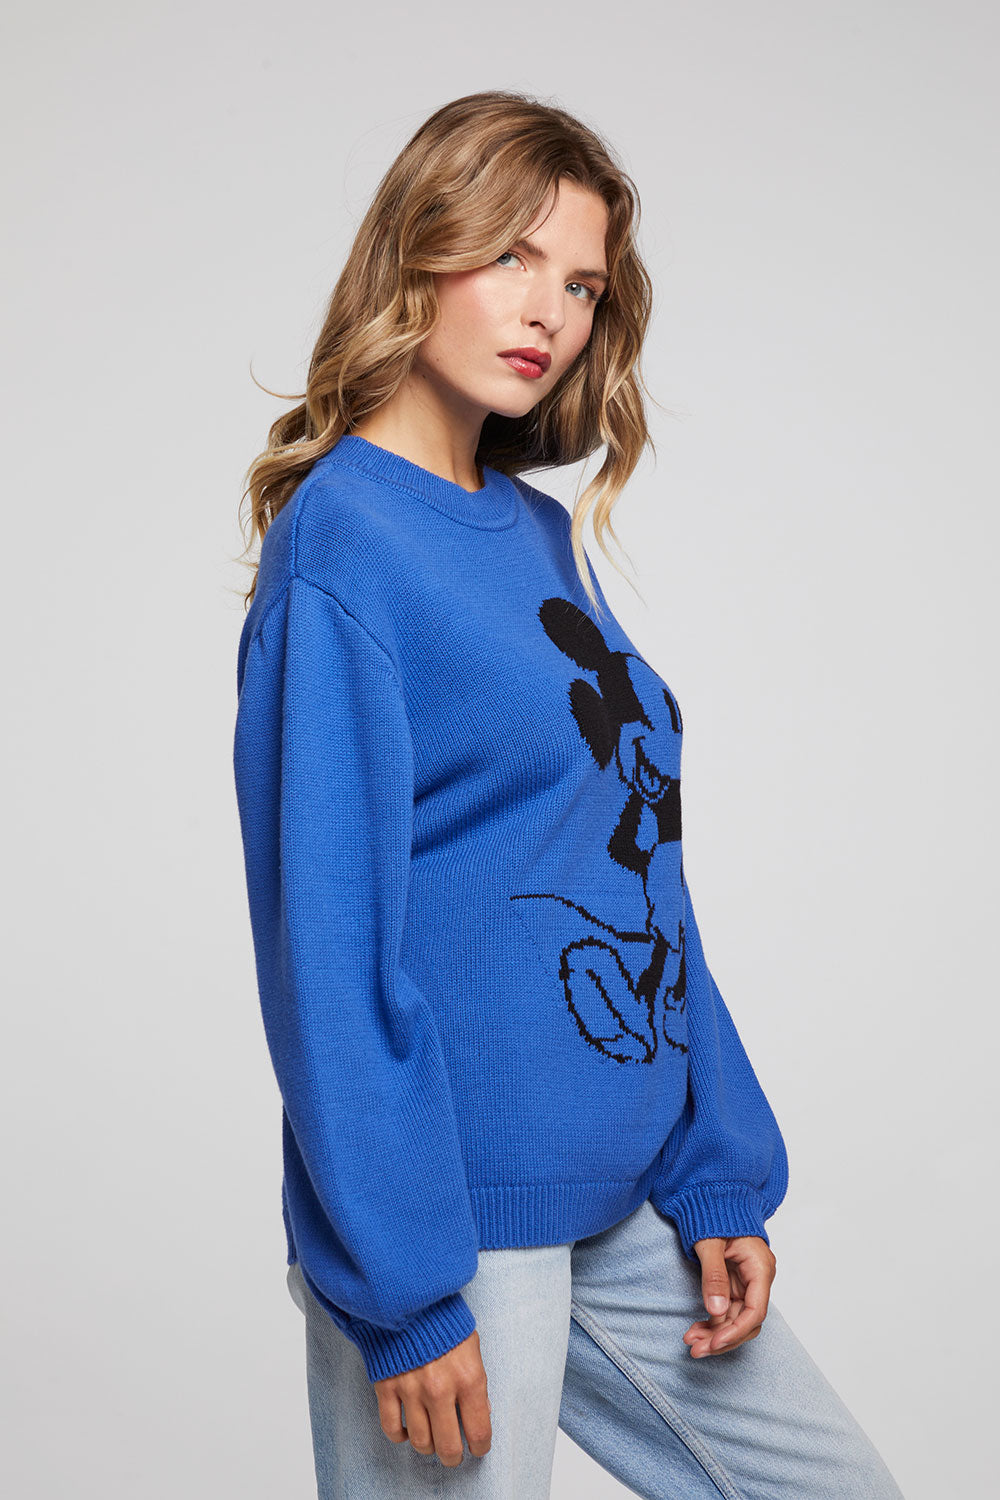 Mickey Mouse Genuine Mousewear Pullover Sweatshirt for Women – Blue size XL